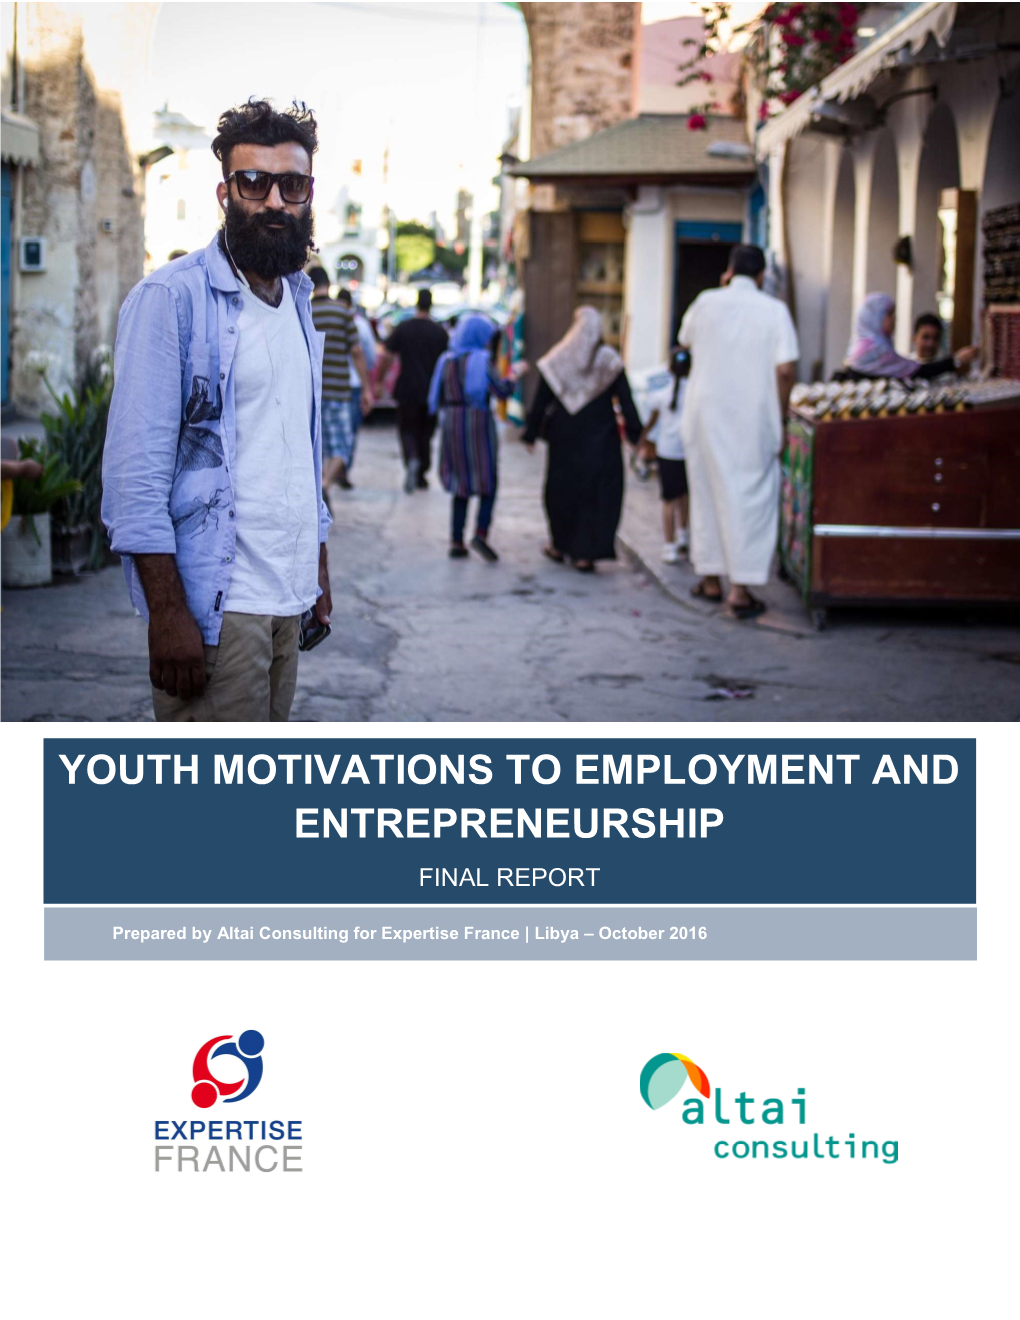 Youth Motivations to Employment and Entrepreneurship Final Report